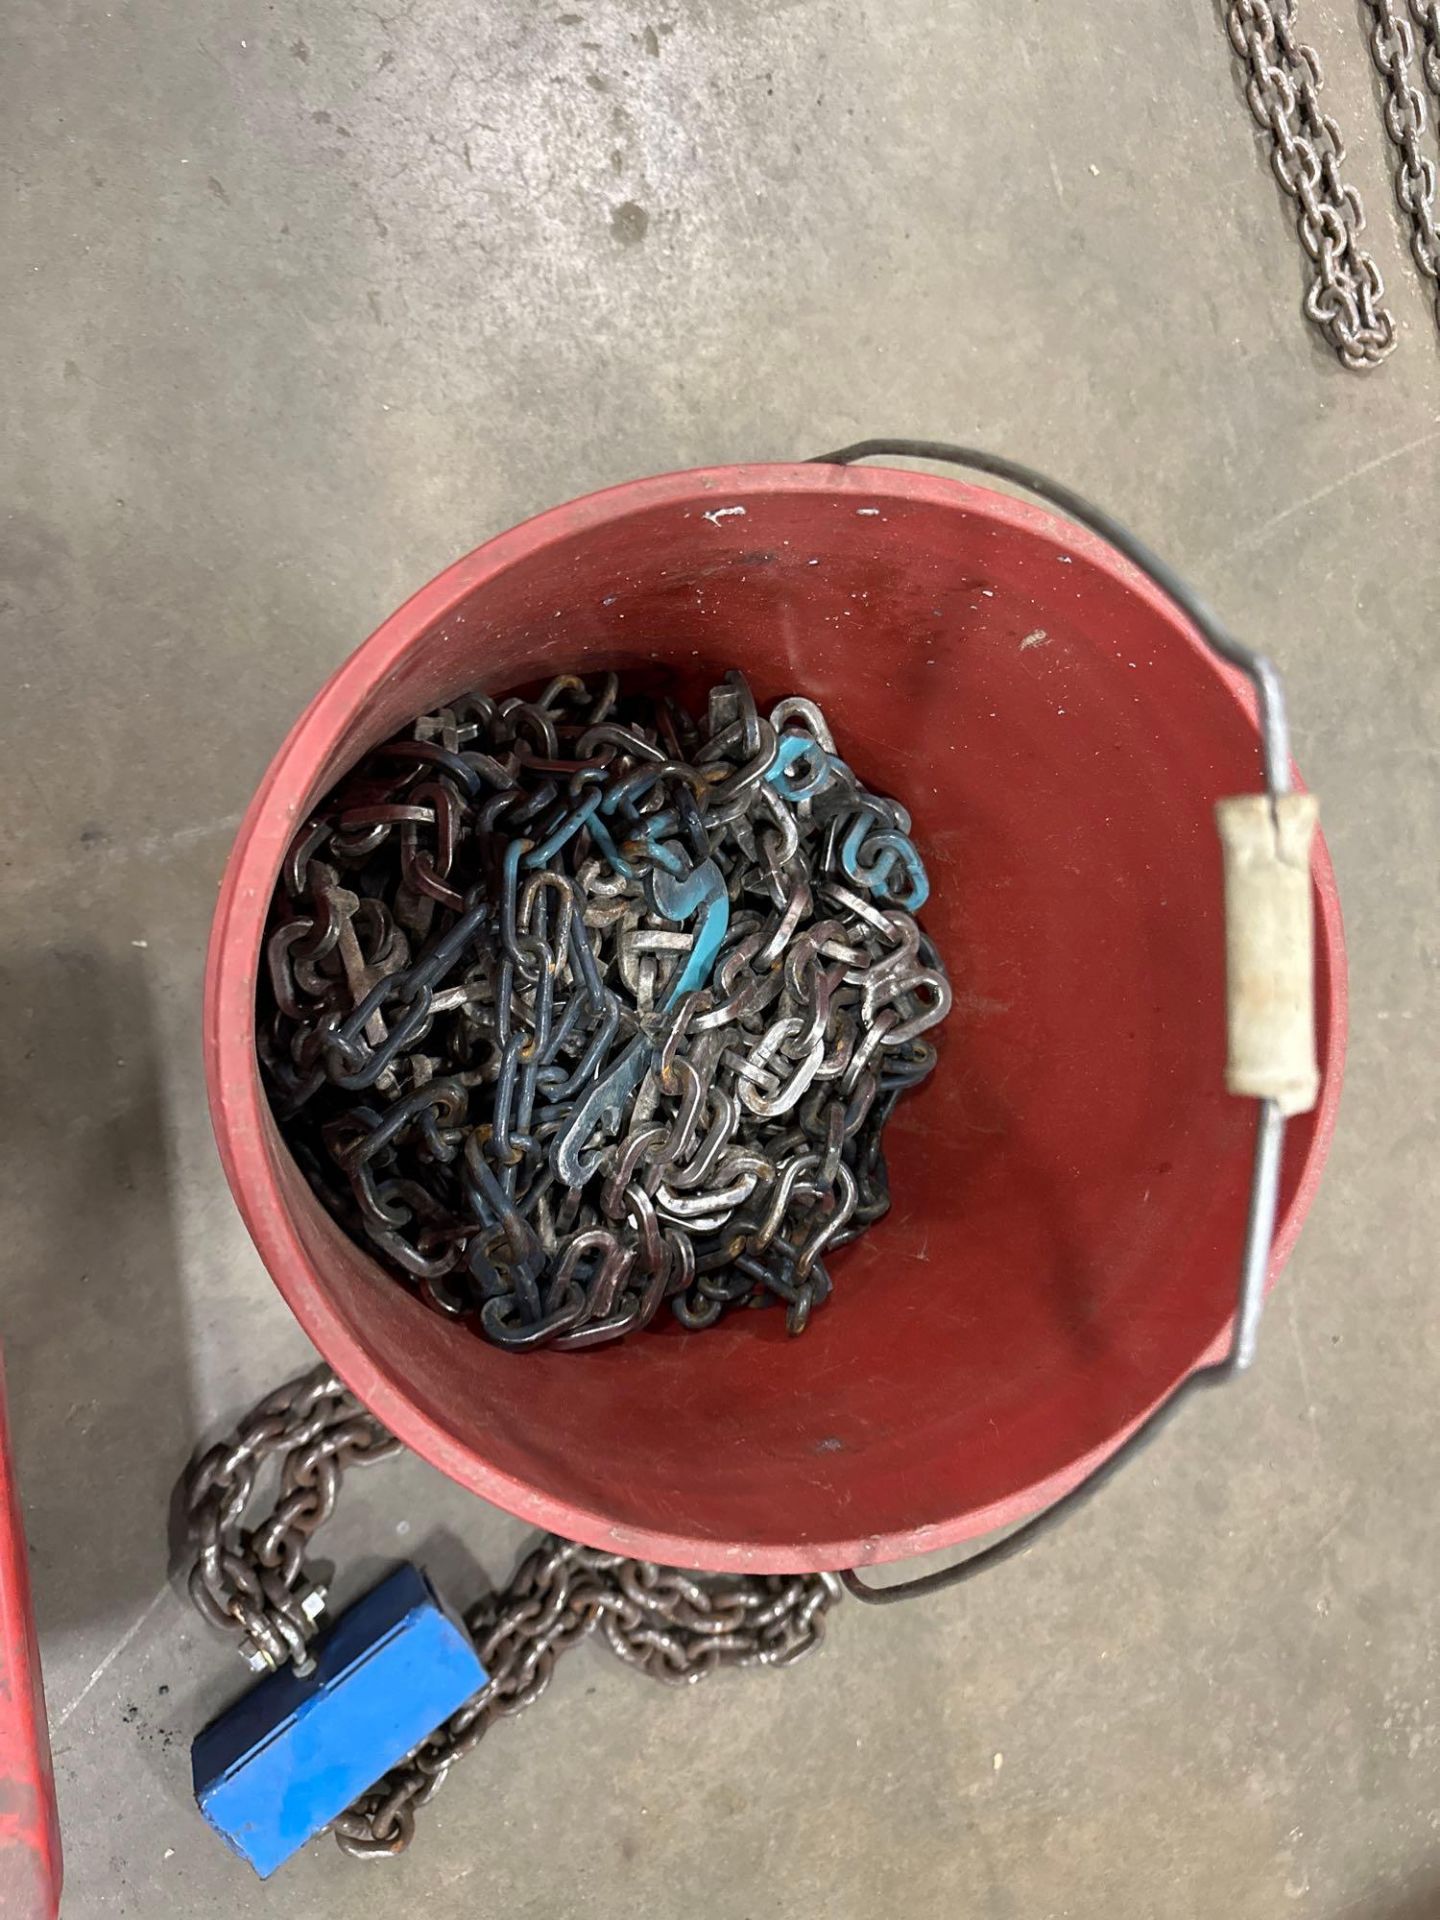 Lot of Asst. Magnetic Lifting Chain, Hoks, Shackles, Chains, etc. - Image 3 of 4